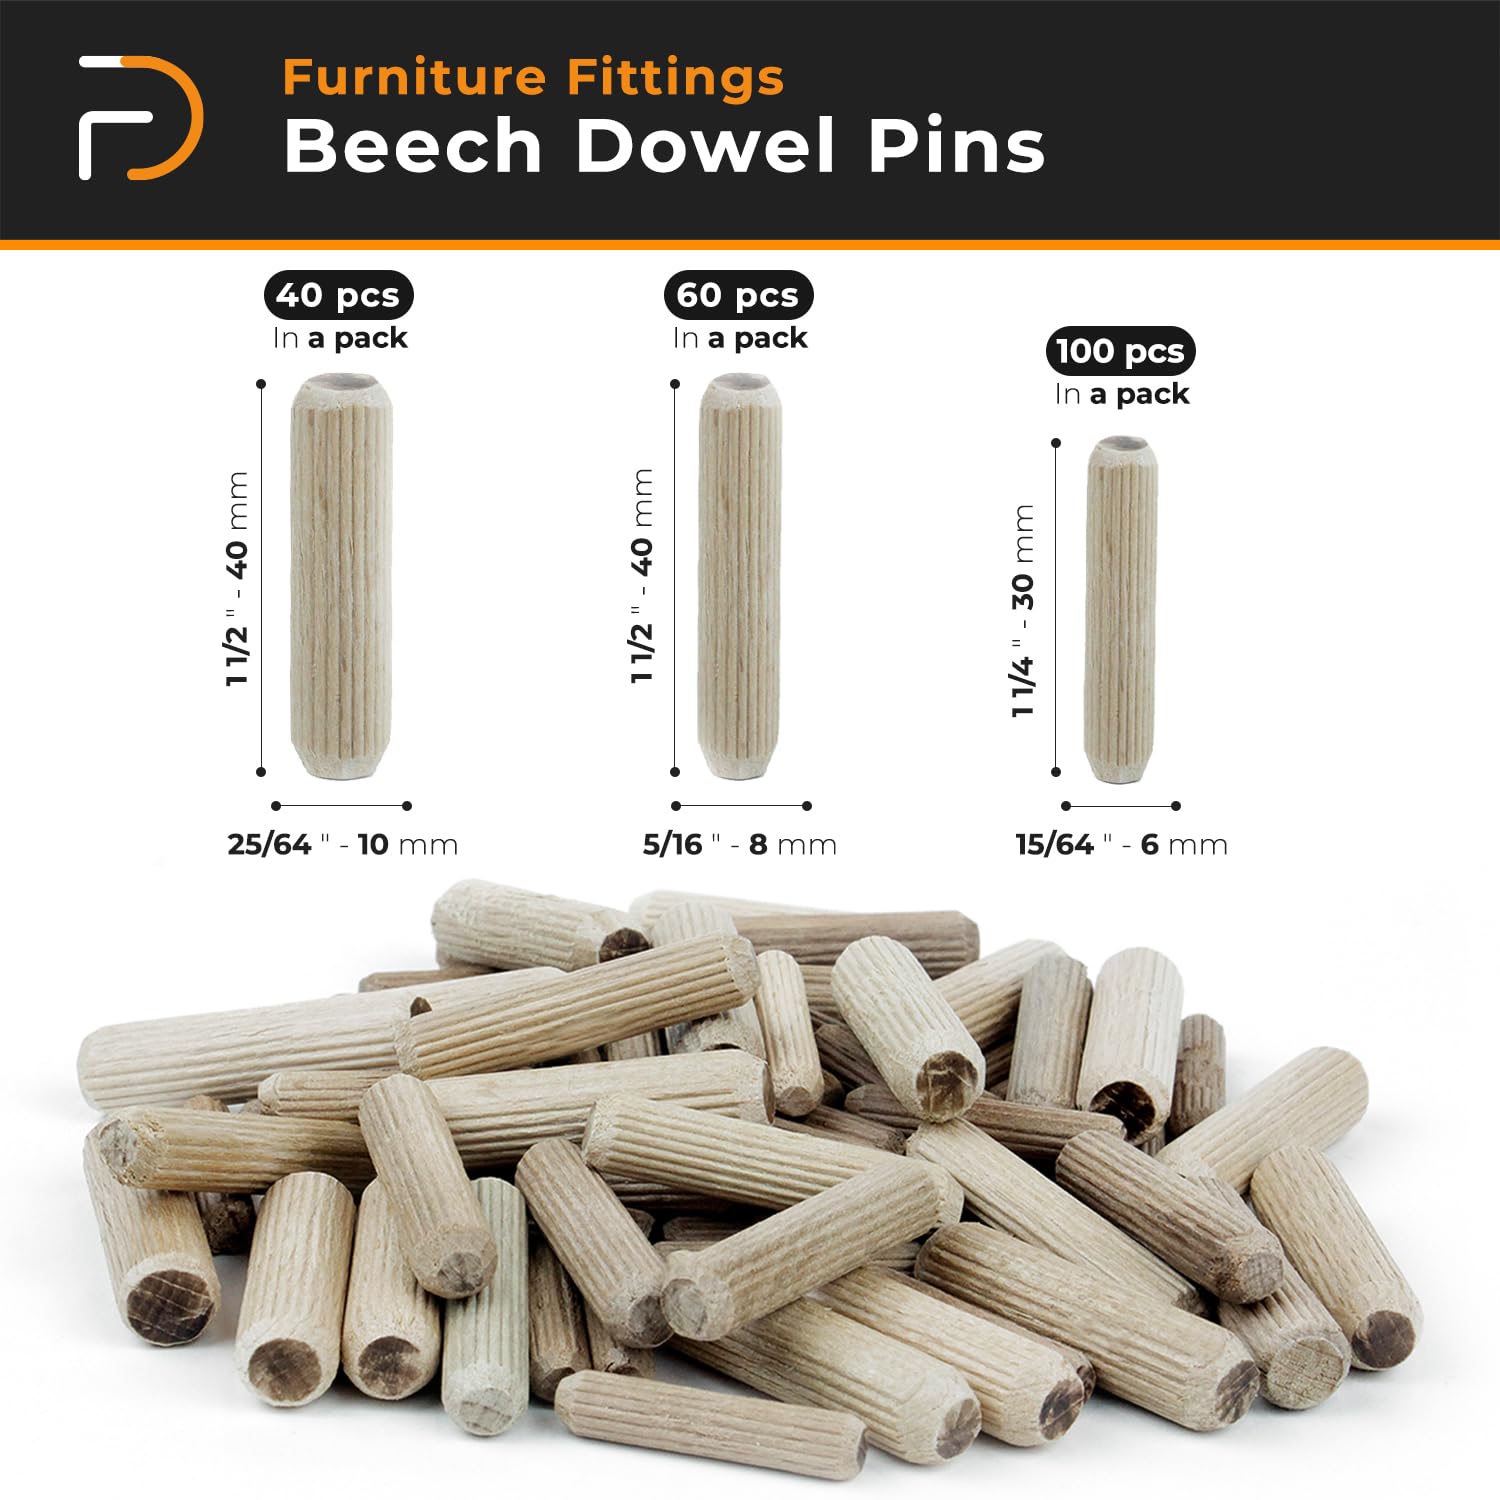 Wood Dowel Pins, Fluted | Easier Insertion Straight Grooved Pins, Craft, DIY, Carpentry (Beech)